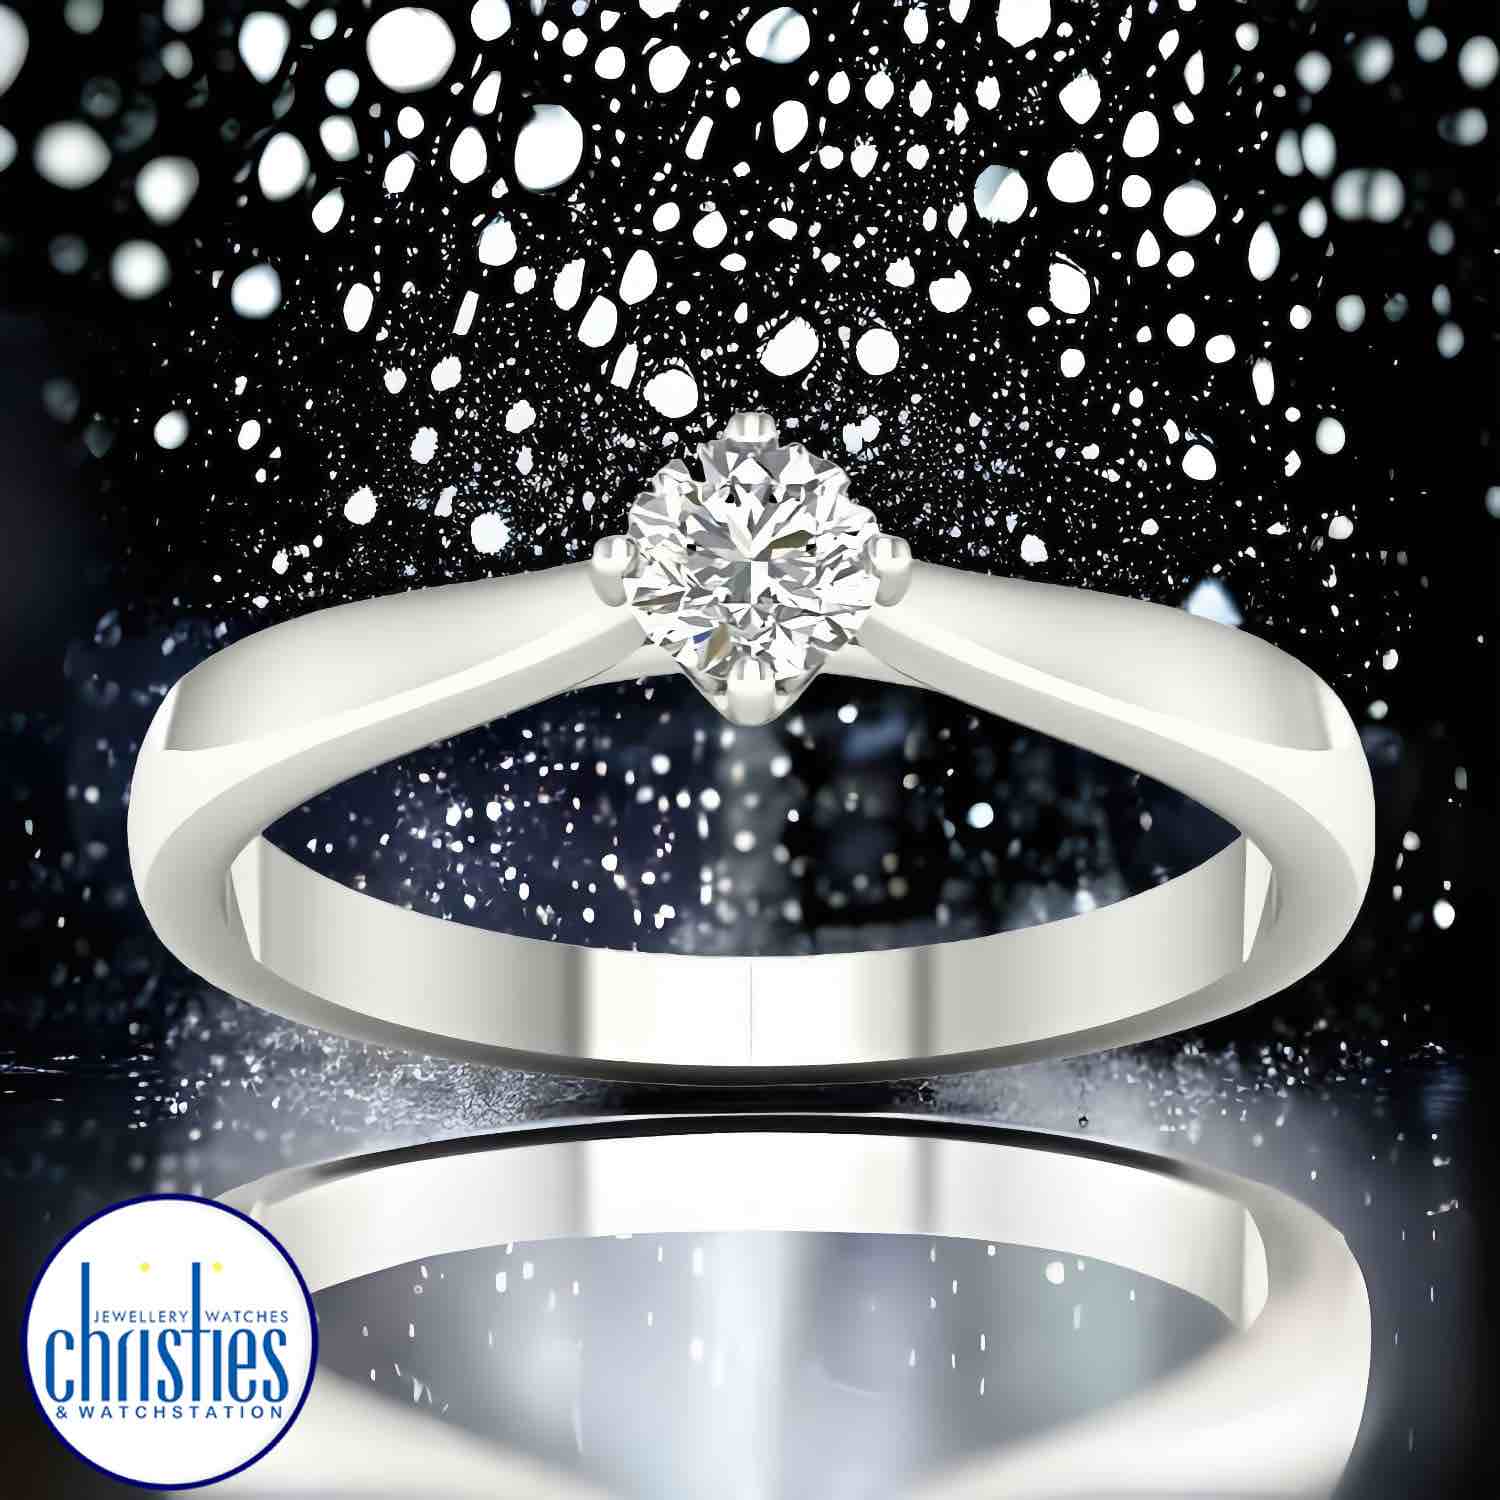 Say "yes" to forever with this stunning 9ct White Gold Diamond Solitaire Engagement Ring. 